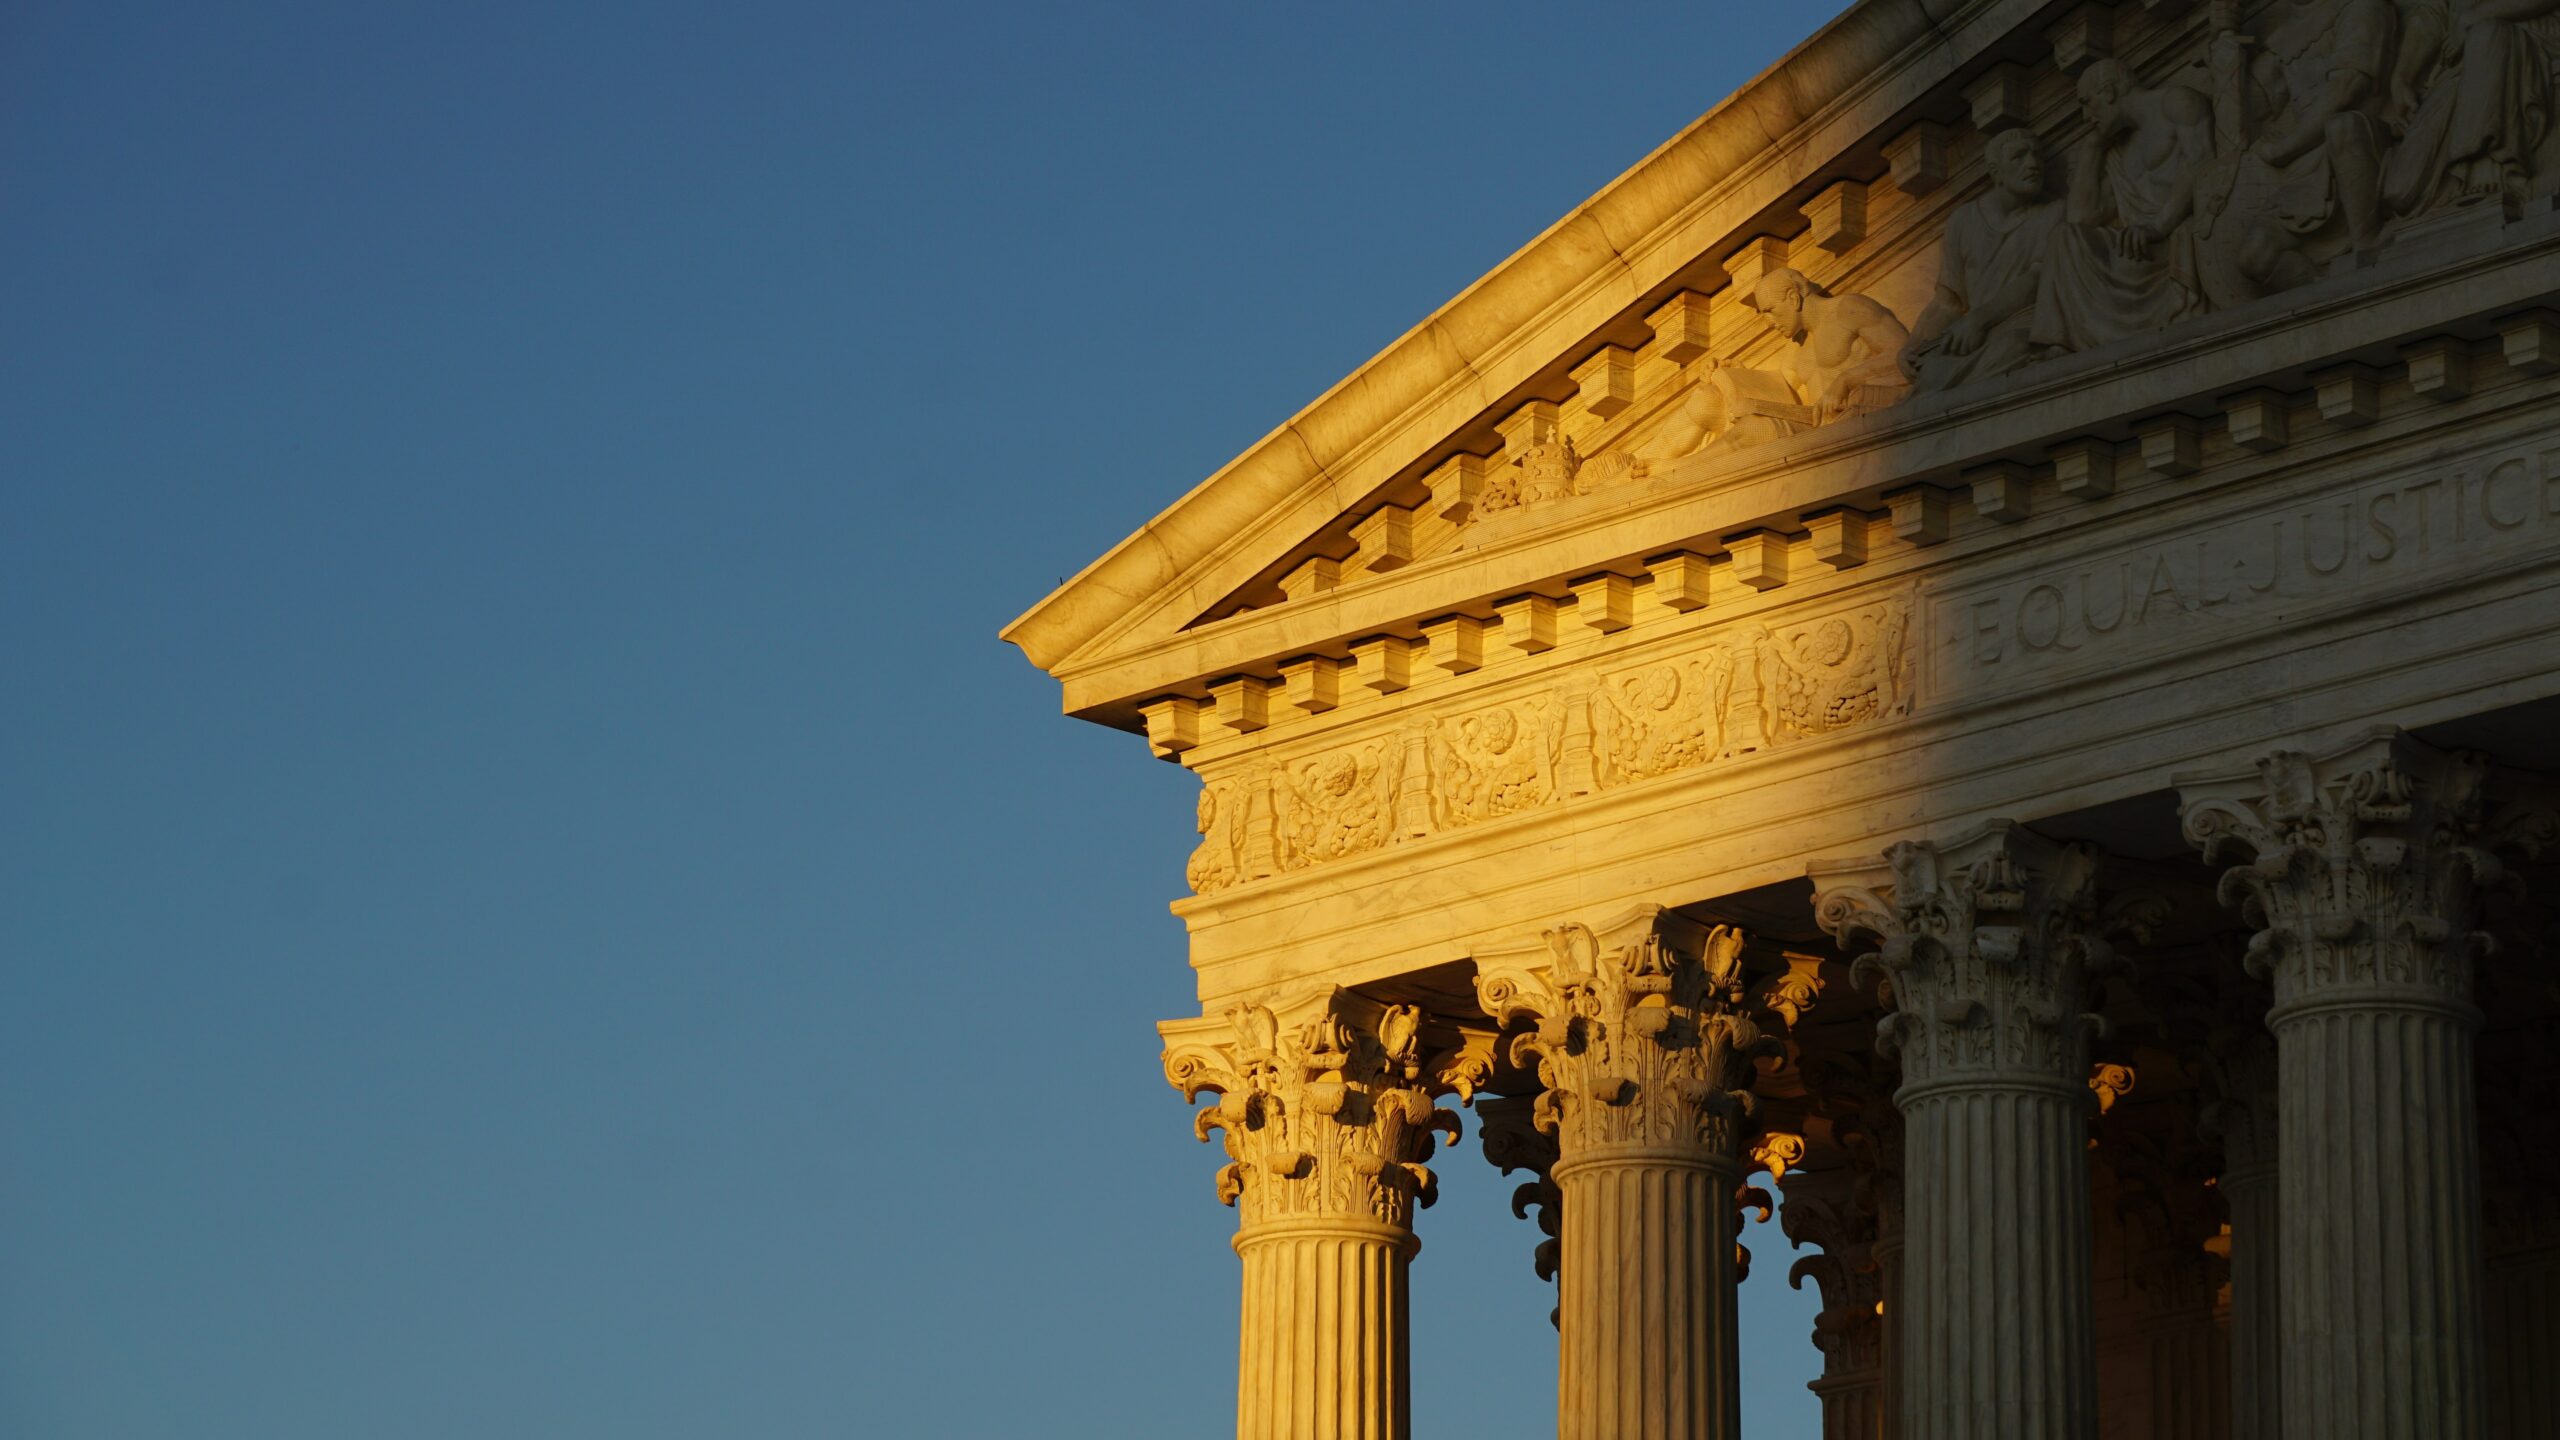 a corner of the supreme court building in golden light in front of a clear blue sky